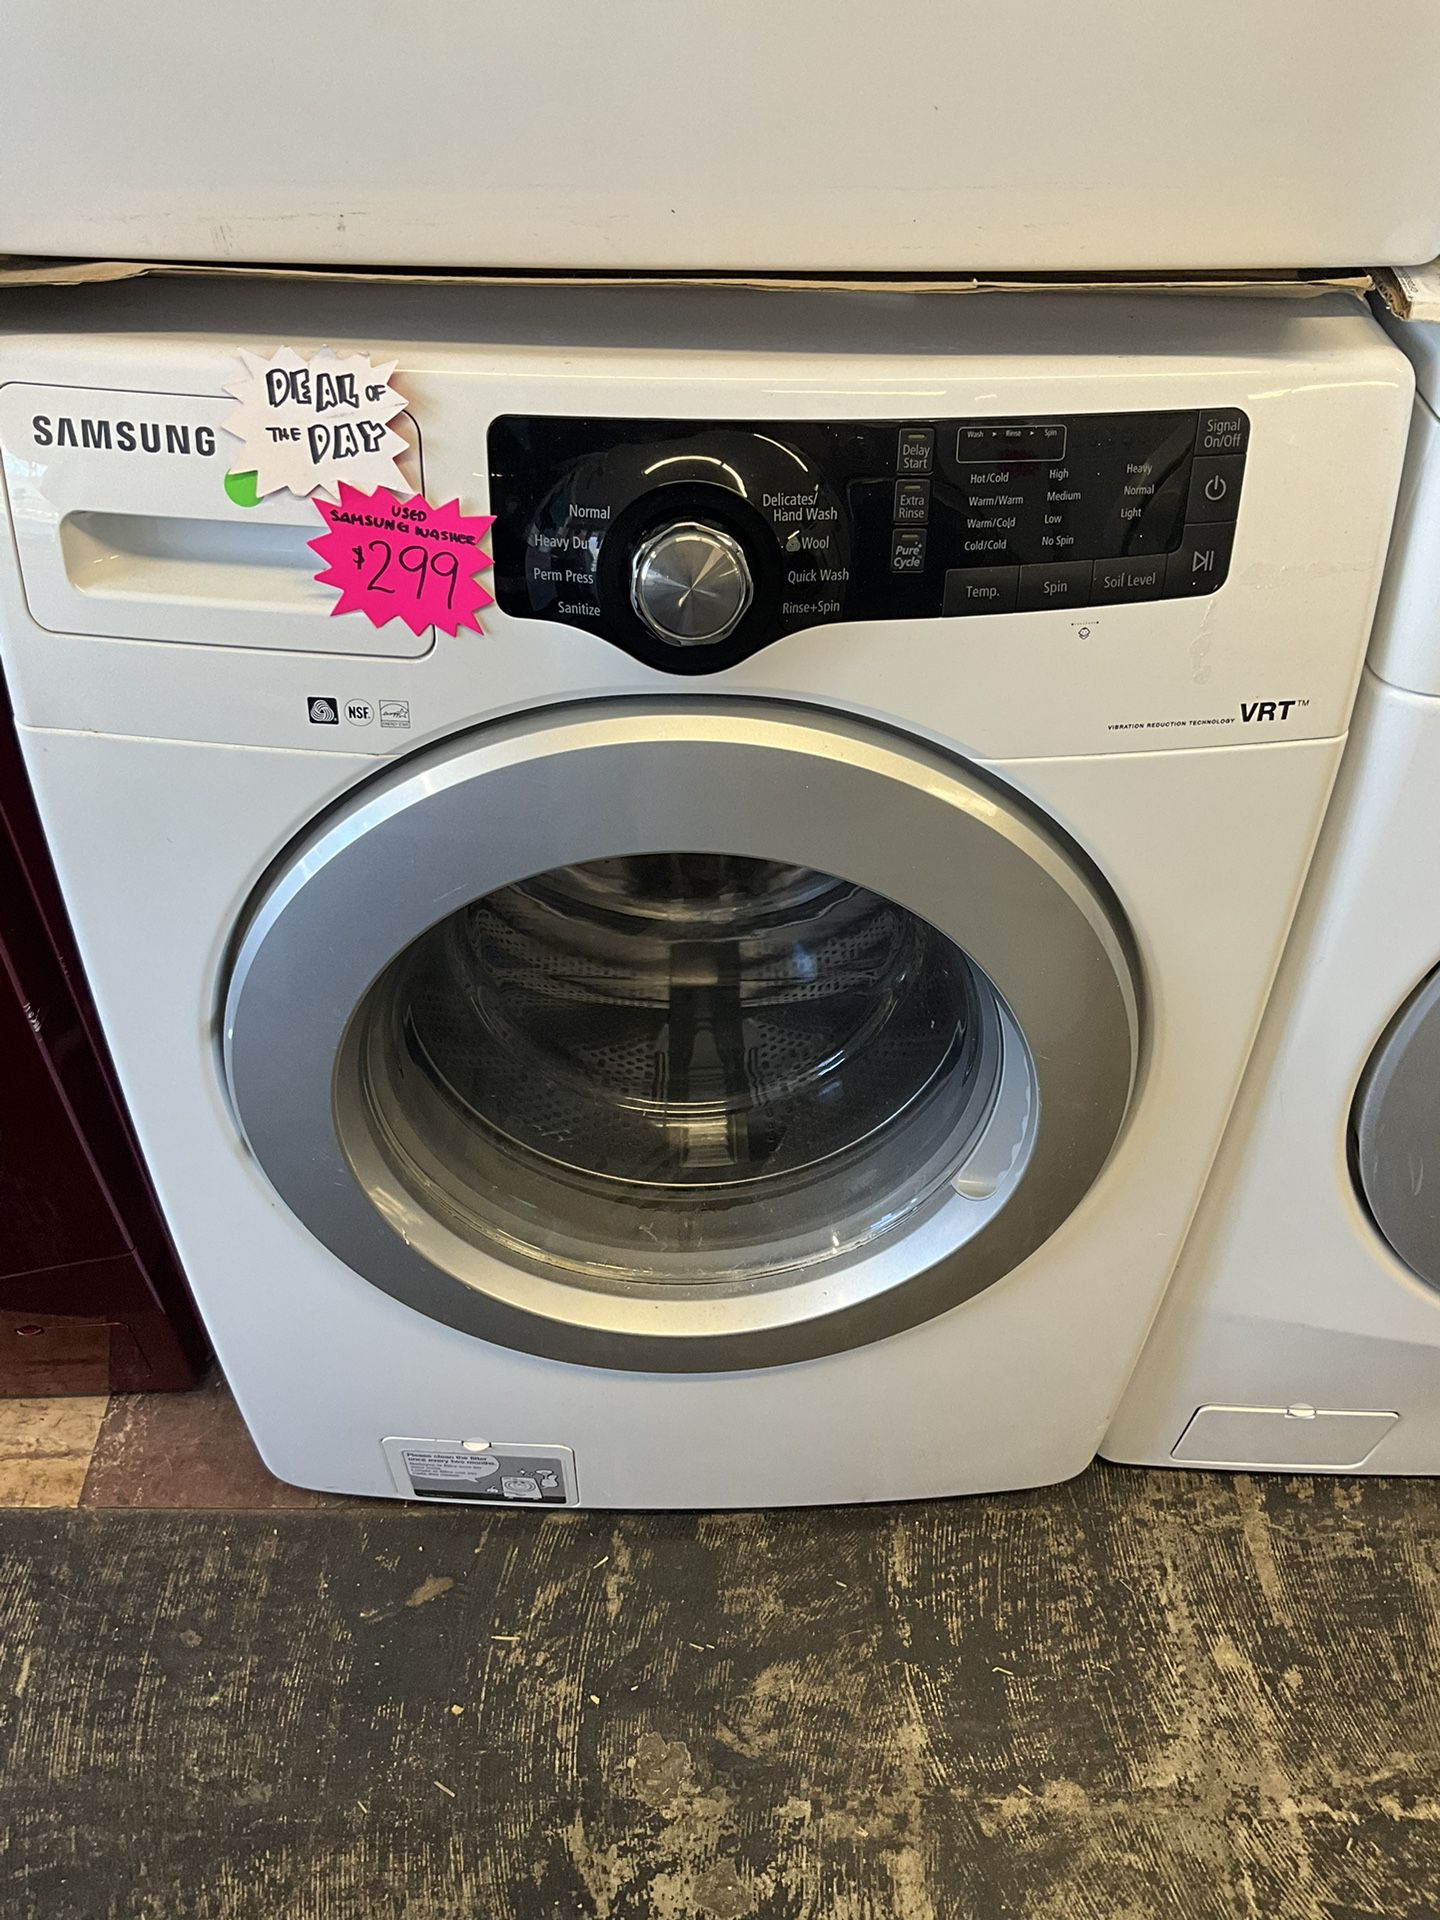 USED SAMSUNG WASHER: DEAL OF THE DAY!